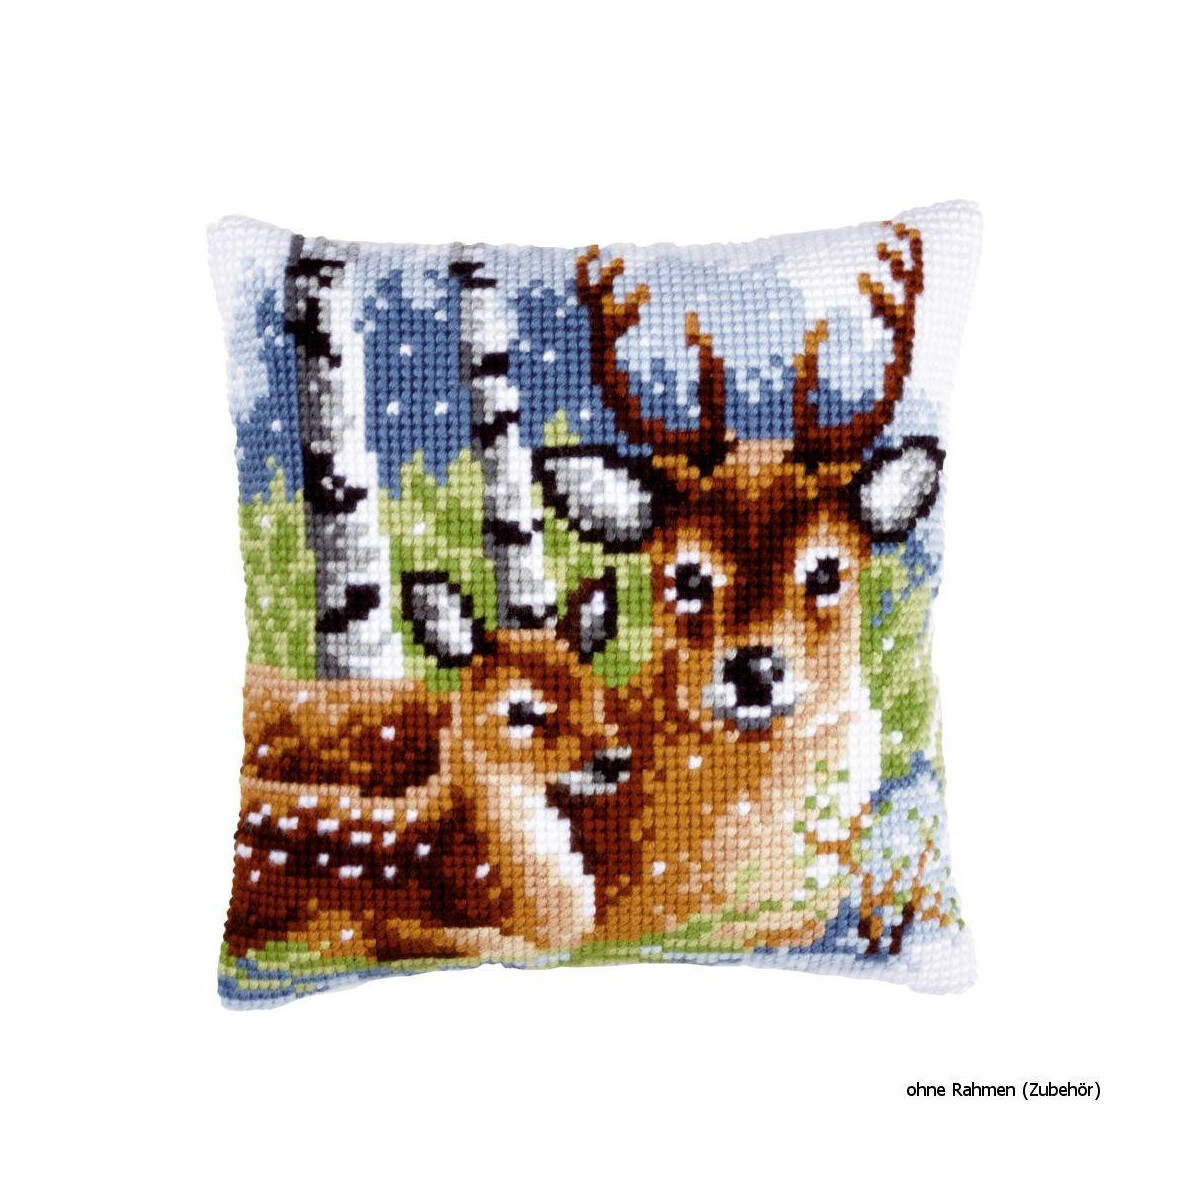 Vervaco stamped cross stitch kit cushion Deer family, DIY